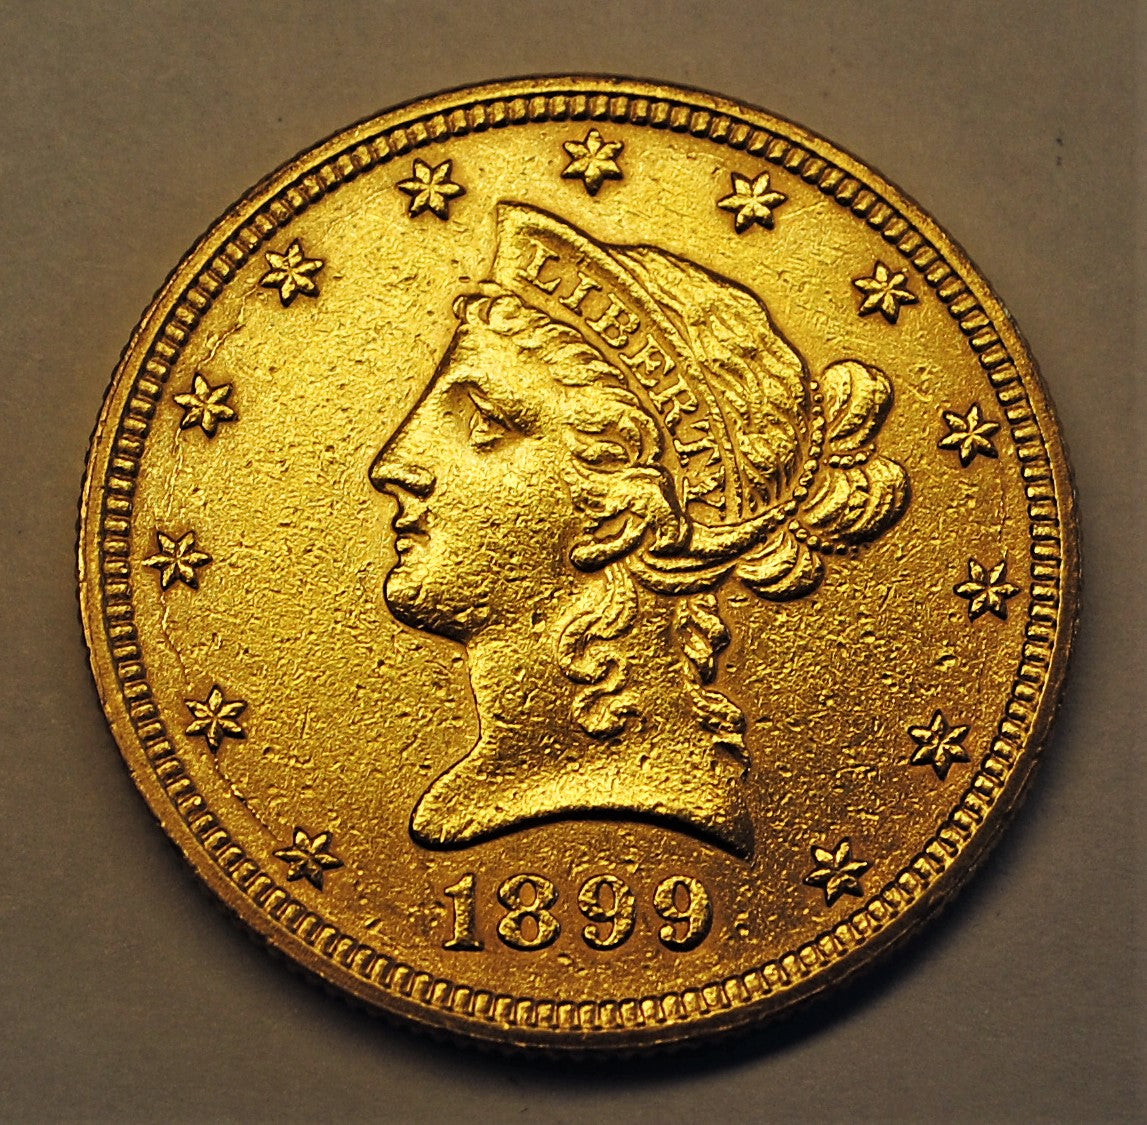 liberty-2-5-dollar-gold-coin-values-discover-their-worth-today